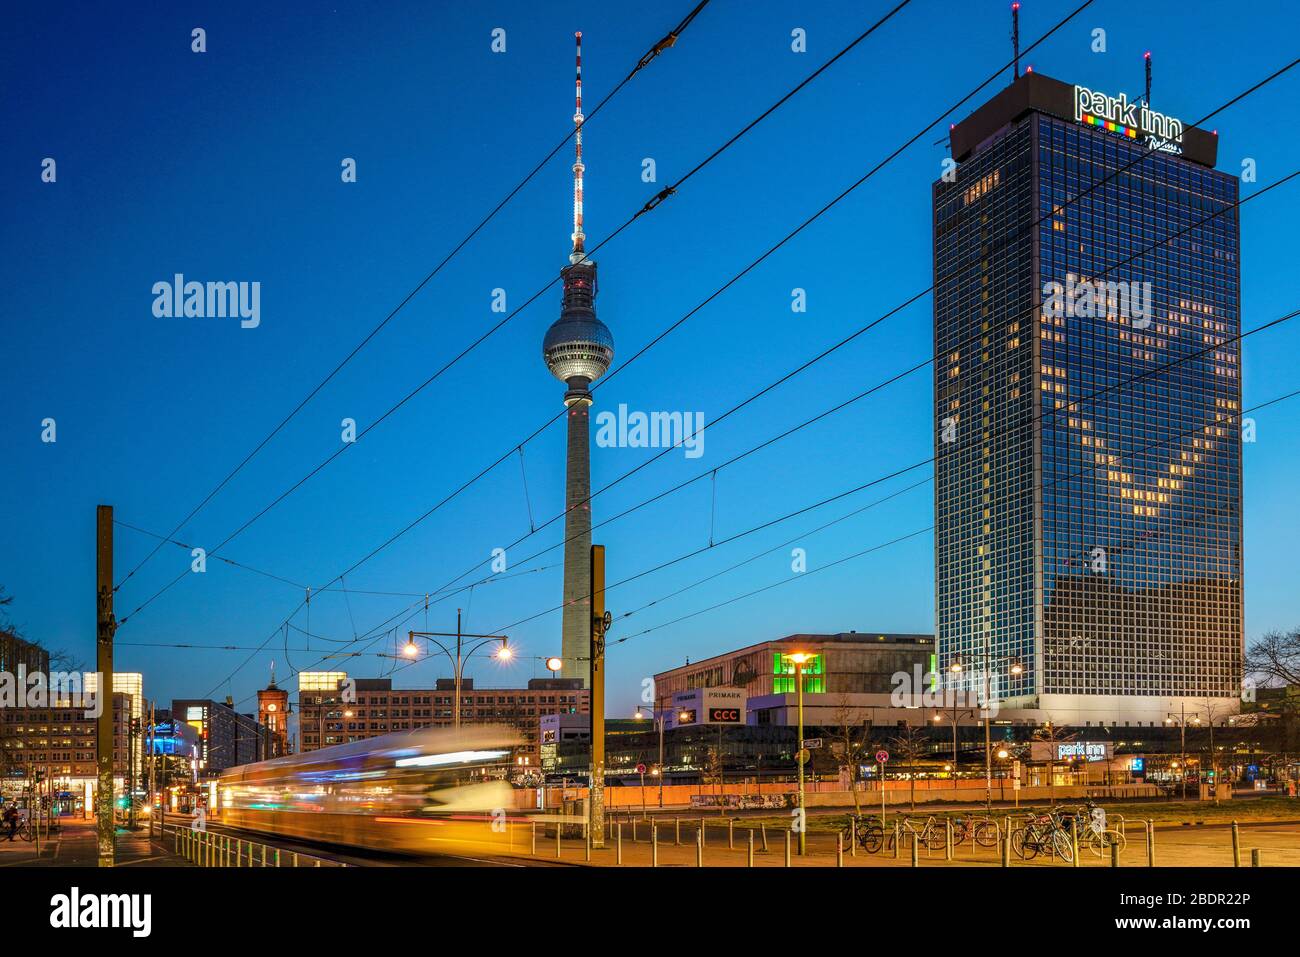 07.04.2020, the Park Inn by Radisson Hotel on Alexanderplatz in Berlin,  like all other hotels at the moment, may not be open for regular operation  due to the corona crisis. However, there